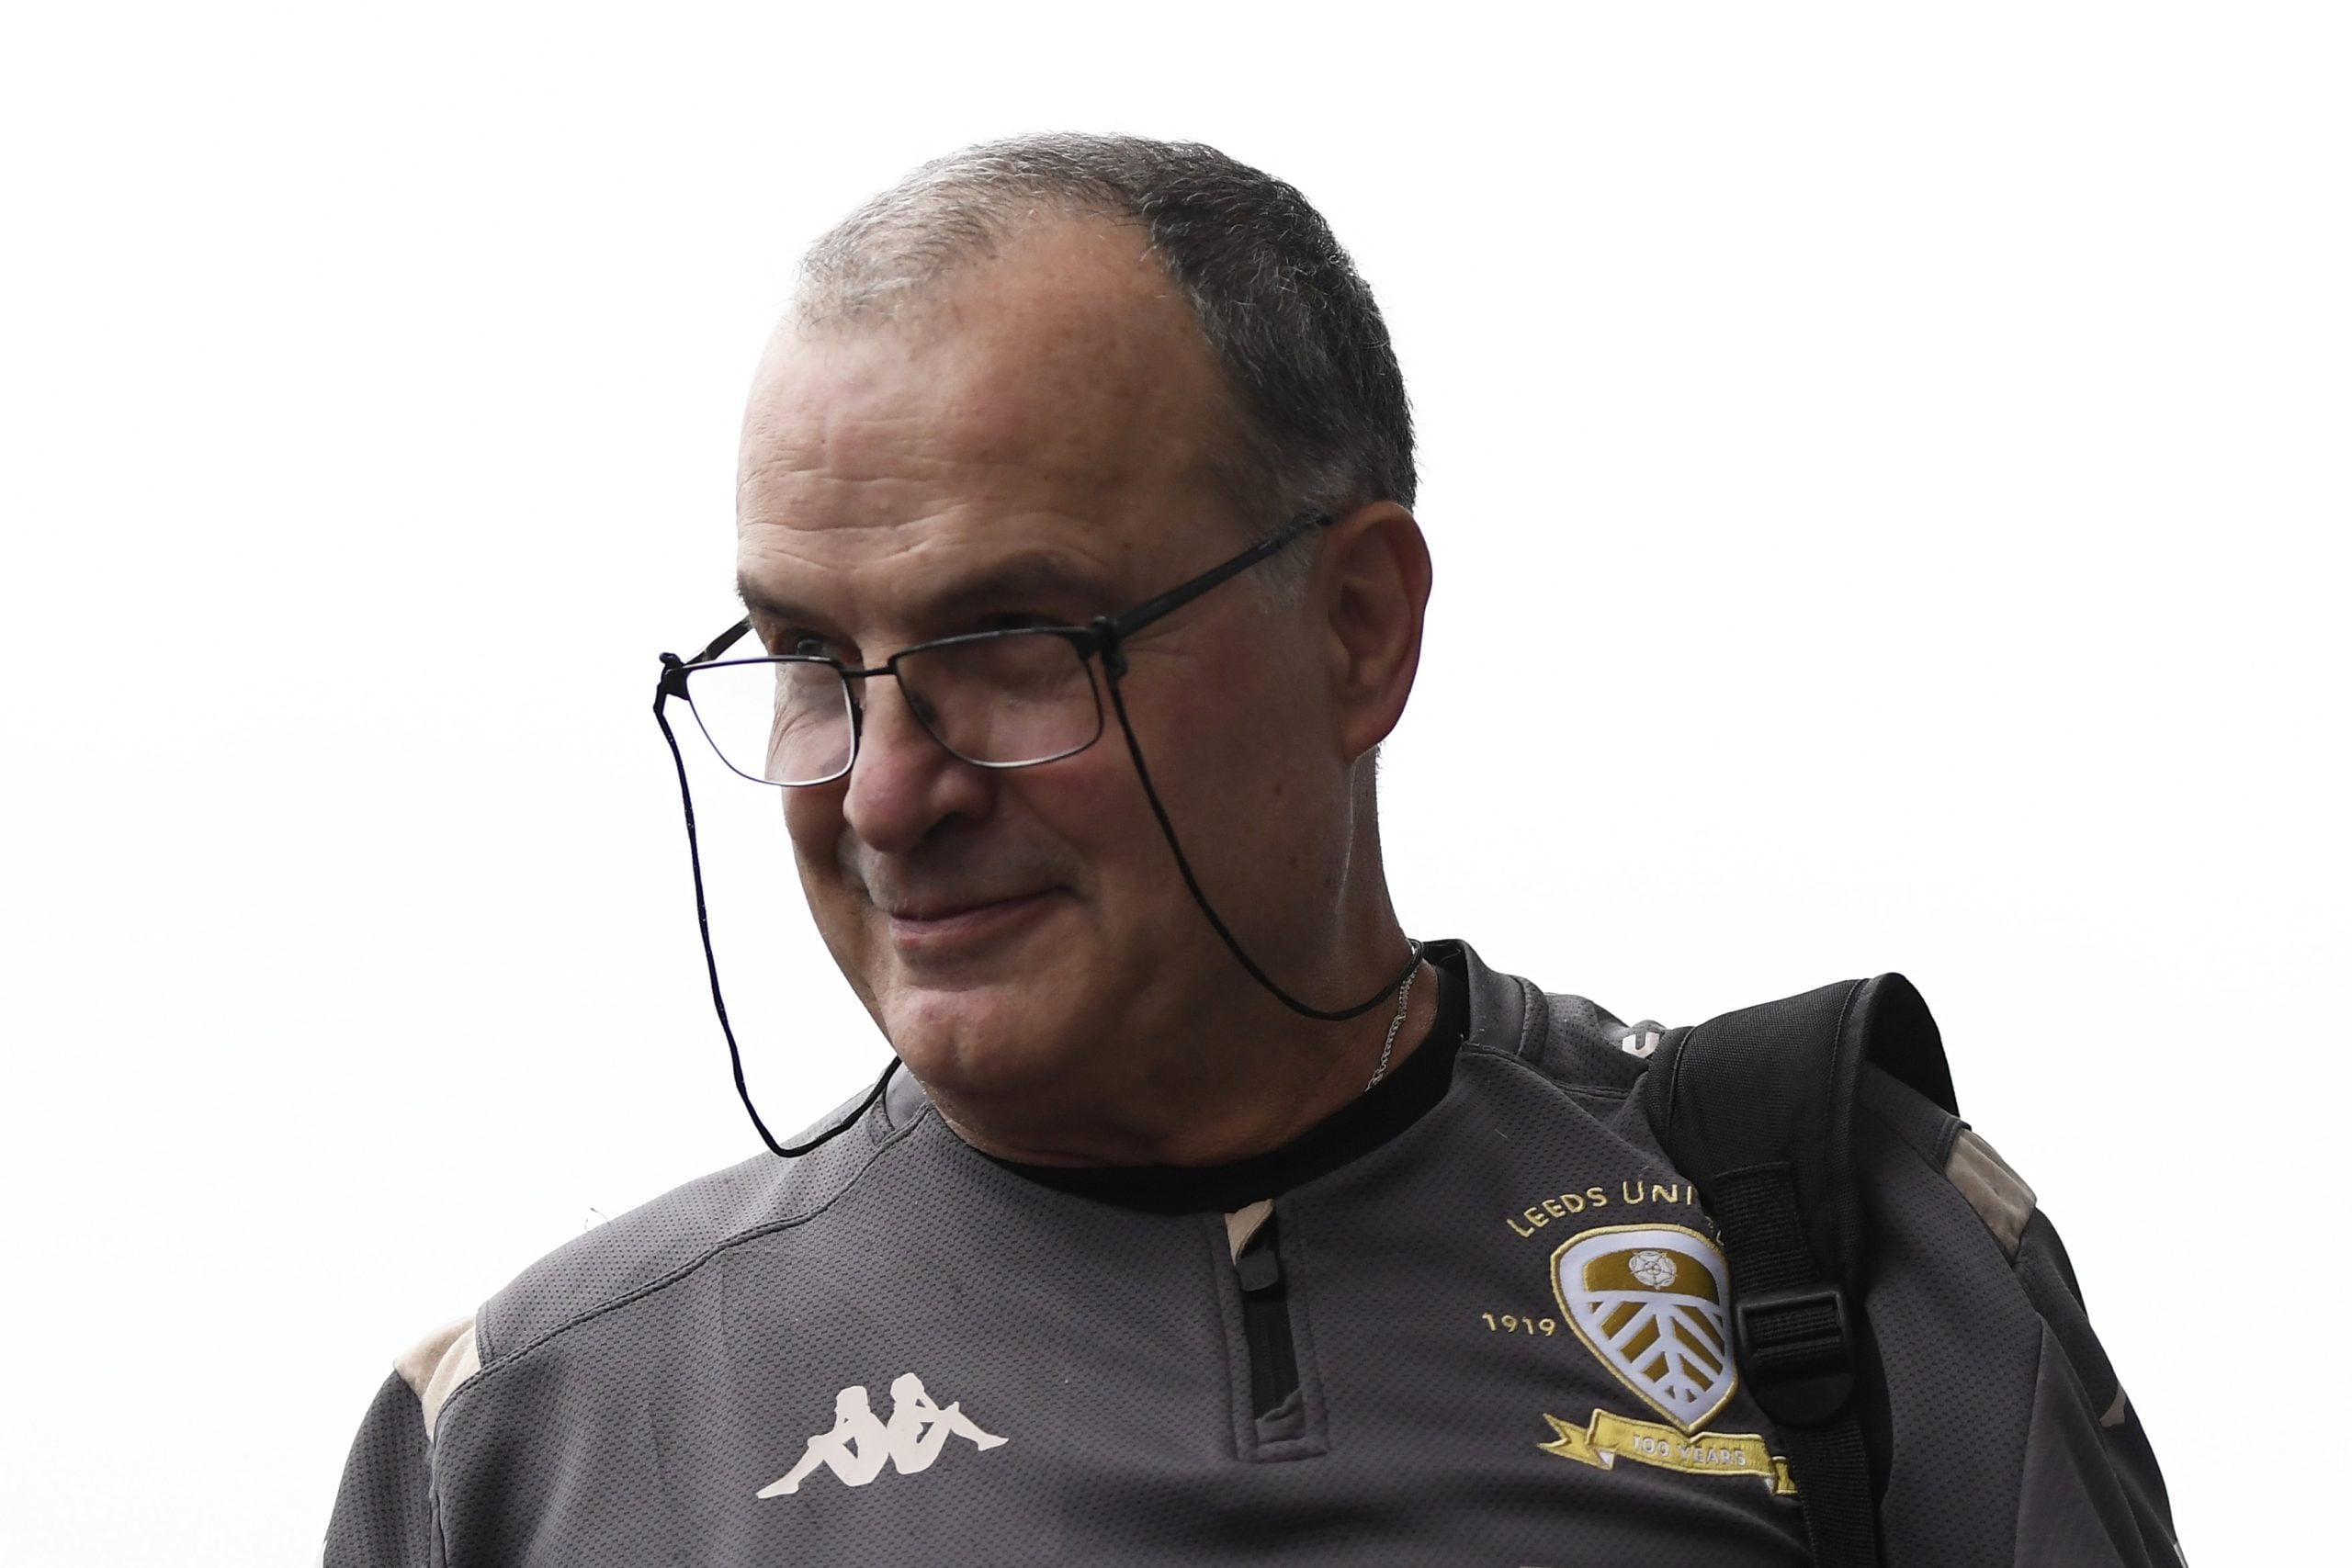 Liverpool vs Leeds United Tactical Preview - Bielsa is ready.